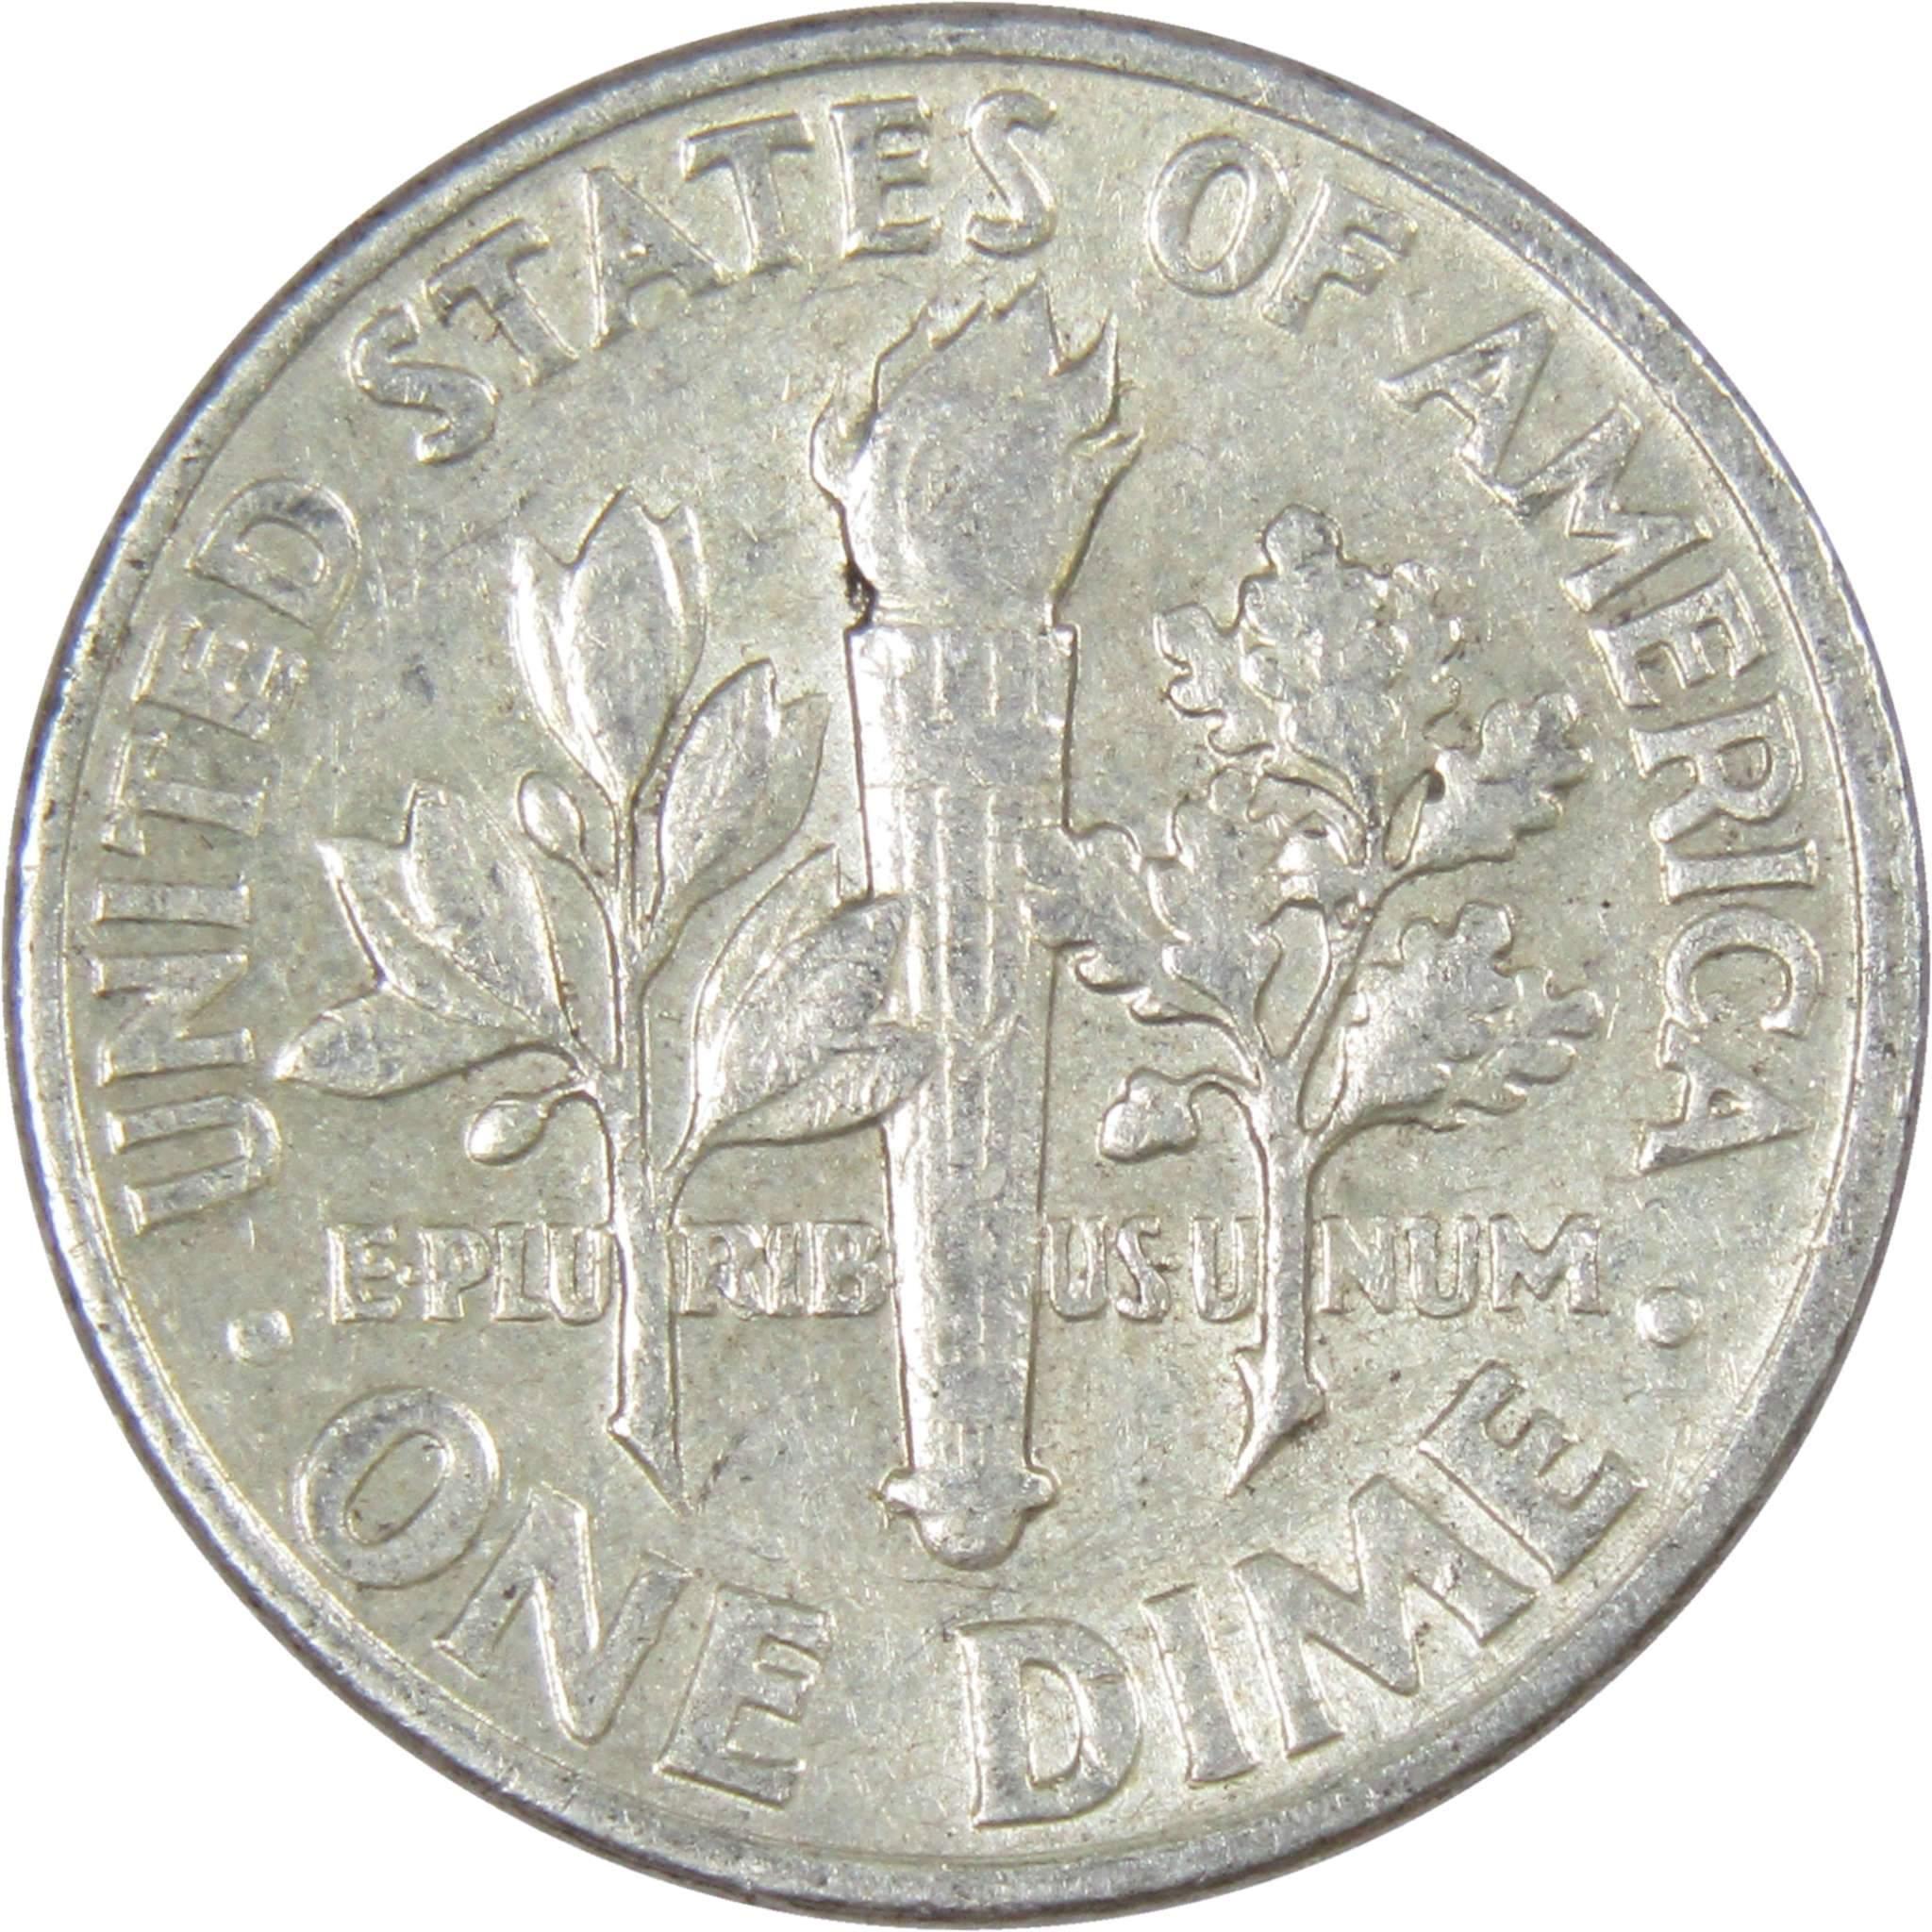 1963 Roosevelt Dime AG About Good 90% Silver 10c US Coin Collectible